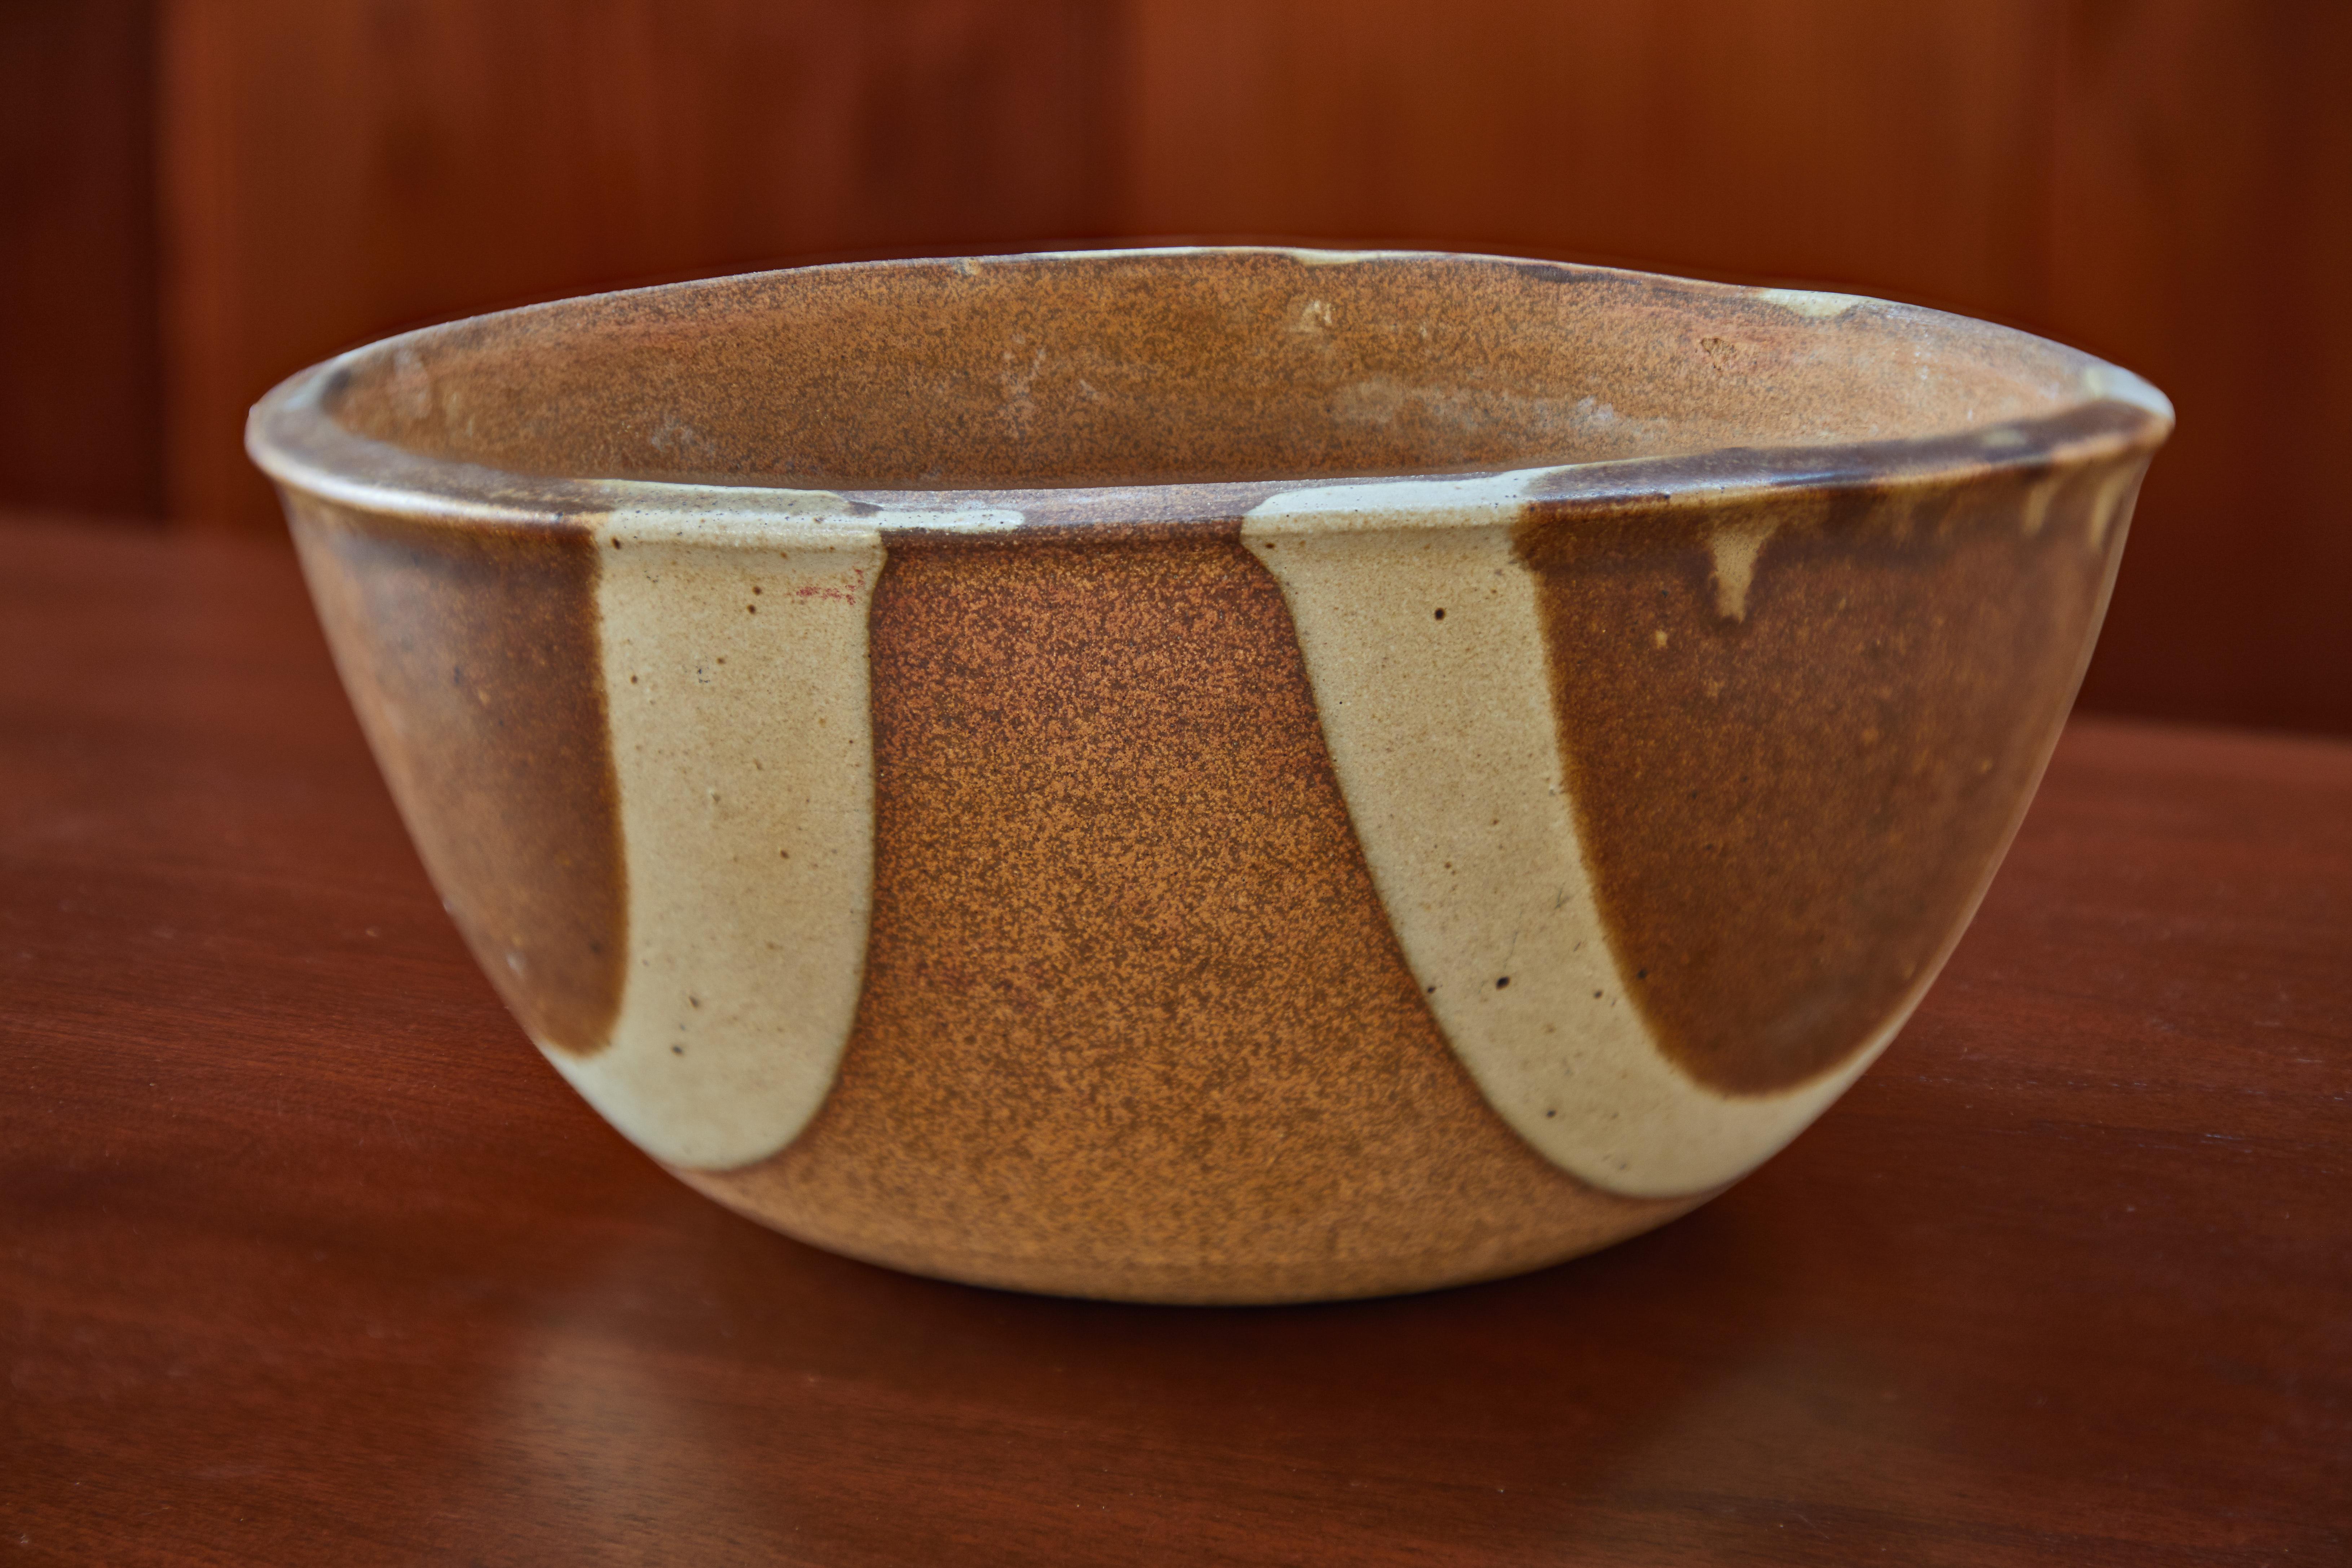 Large 1960s David Cressey Gourmet Ware bowl for architectural pottery. Hand thrown and glazed in earthenware with beautiful contrasting arch design. A very clean example of an increasingly rare and collectible design icon. Stamped 